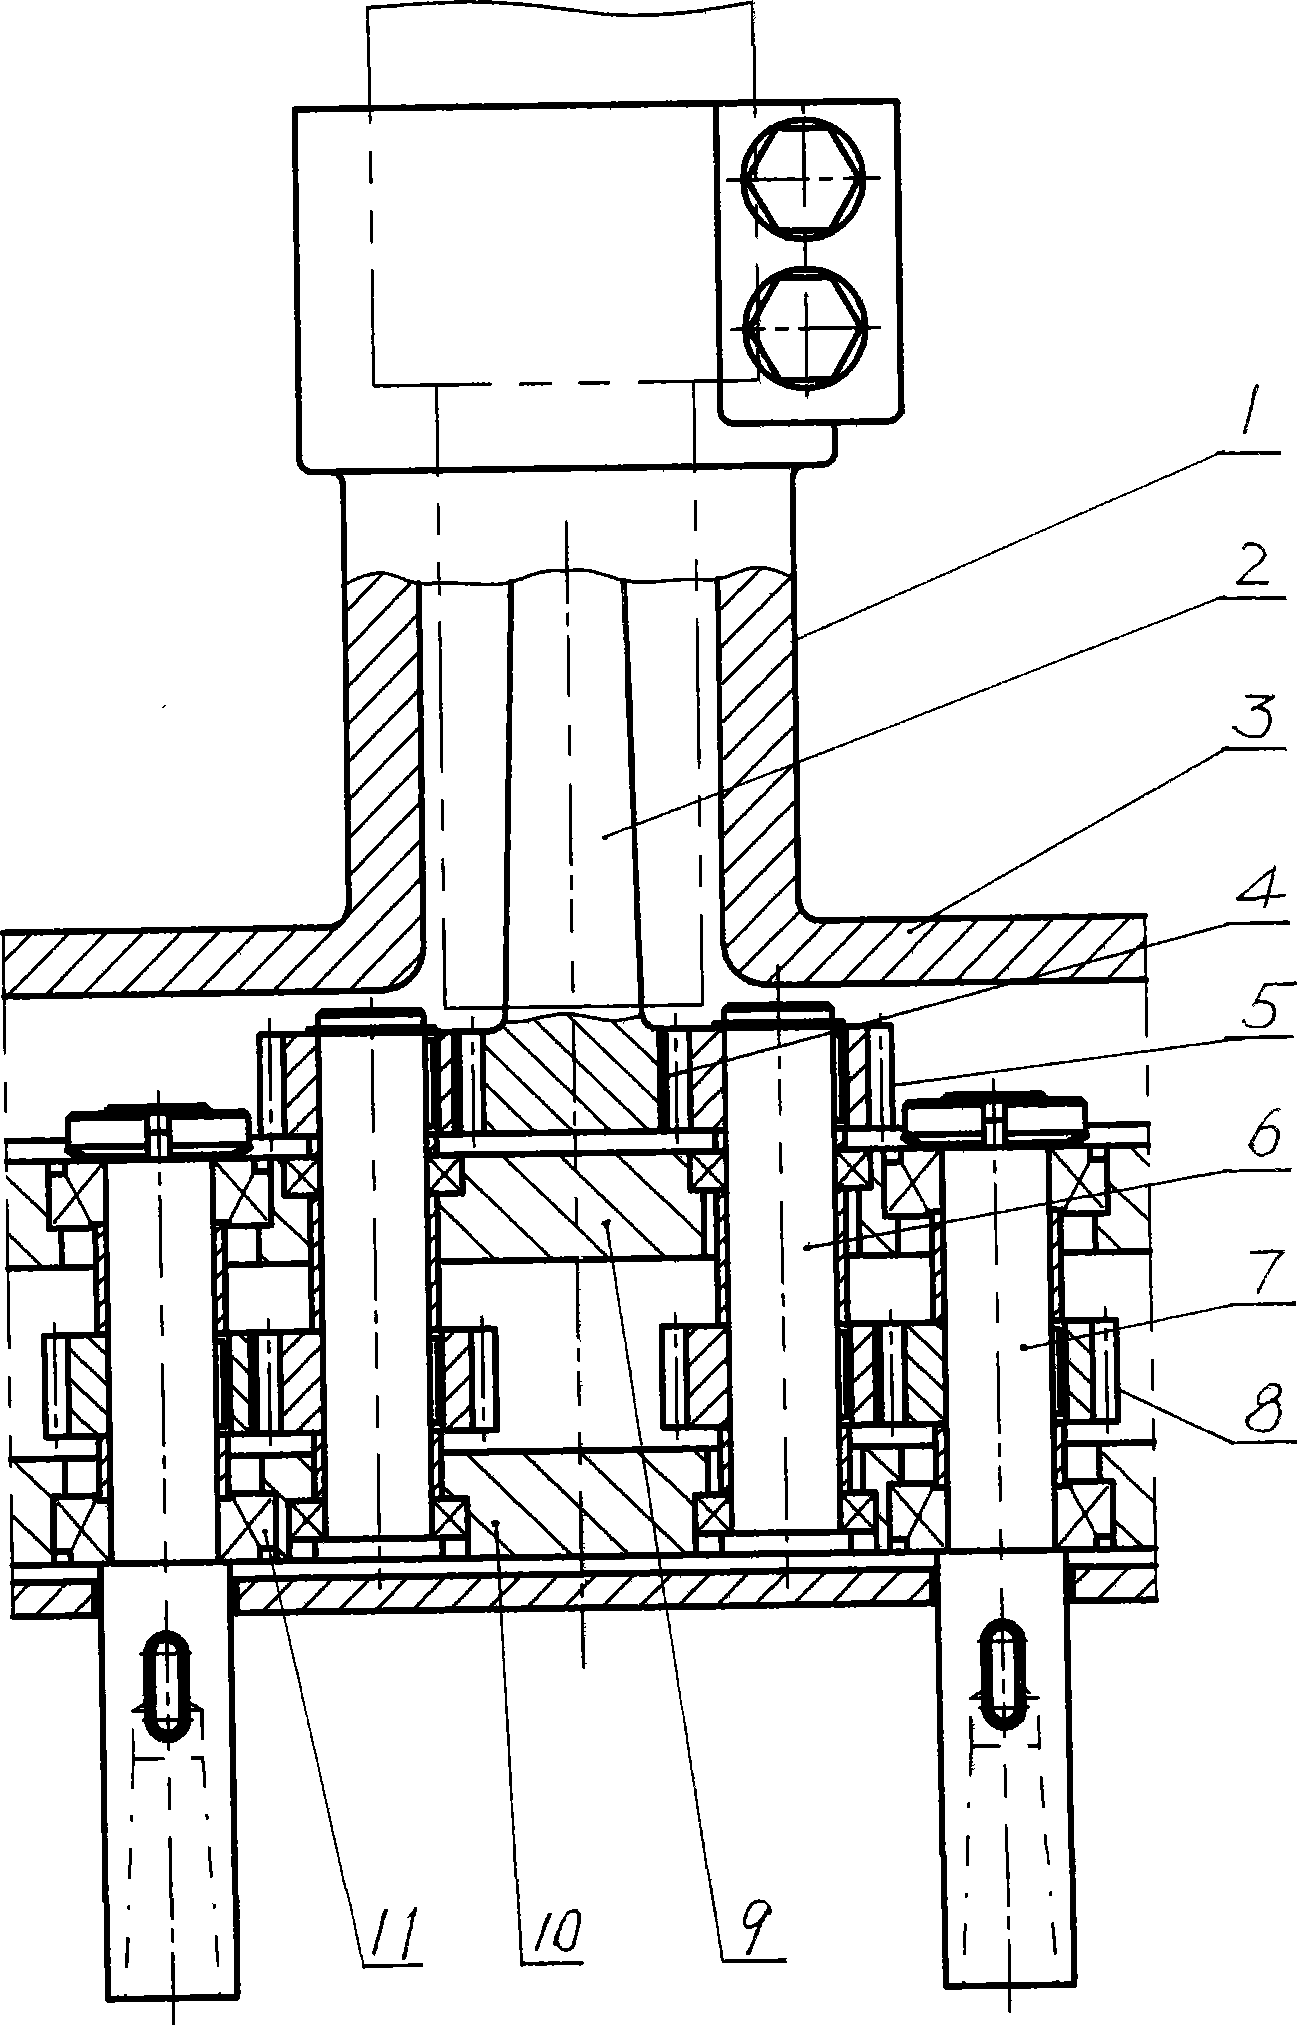 Double-hole processing device for upright drill press